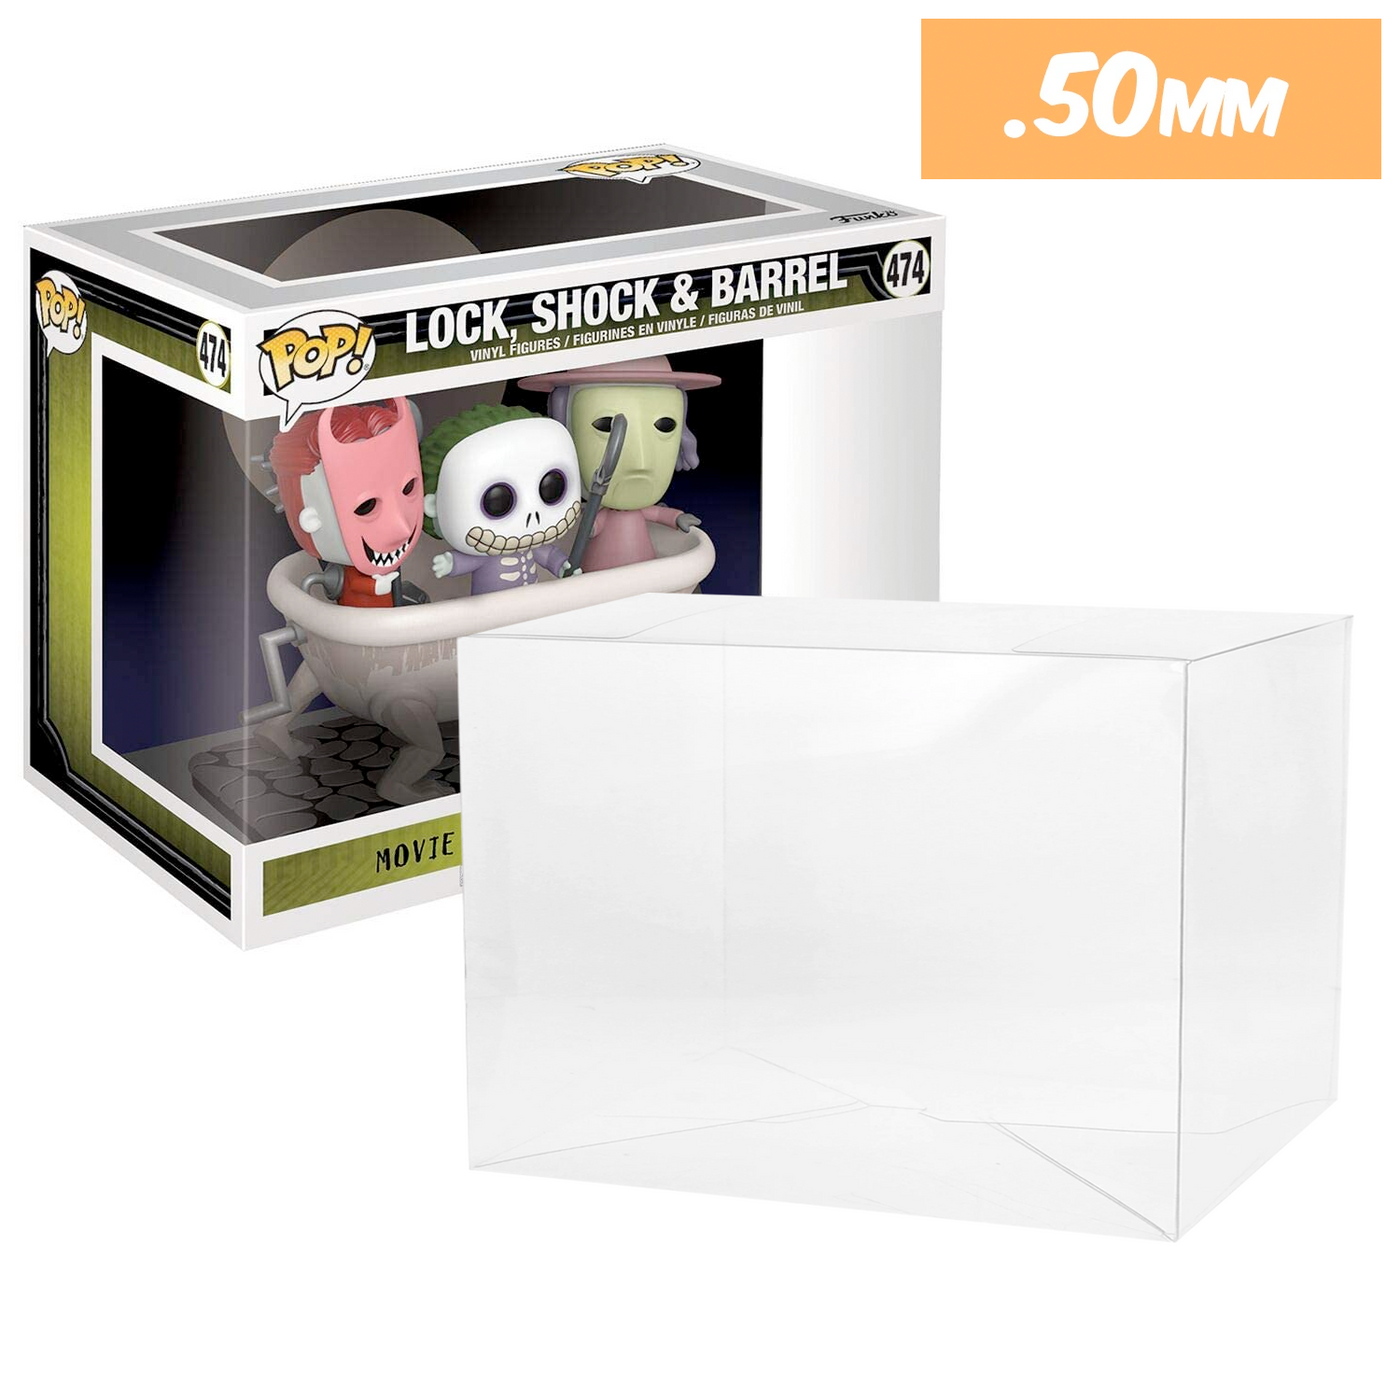 474 nightmare lock shock barrel movie moment best funko pop protectors thick strong uv scratch flat top stack vinyl display geek plastic shield vaulted eco armor fits collect protect display case kollector protector